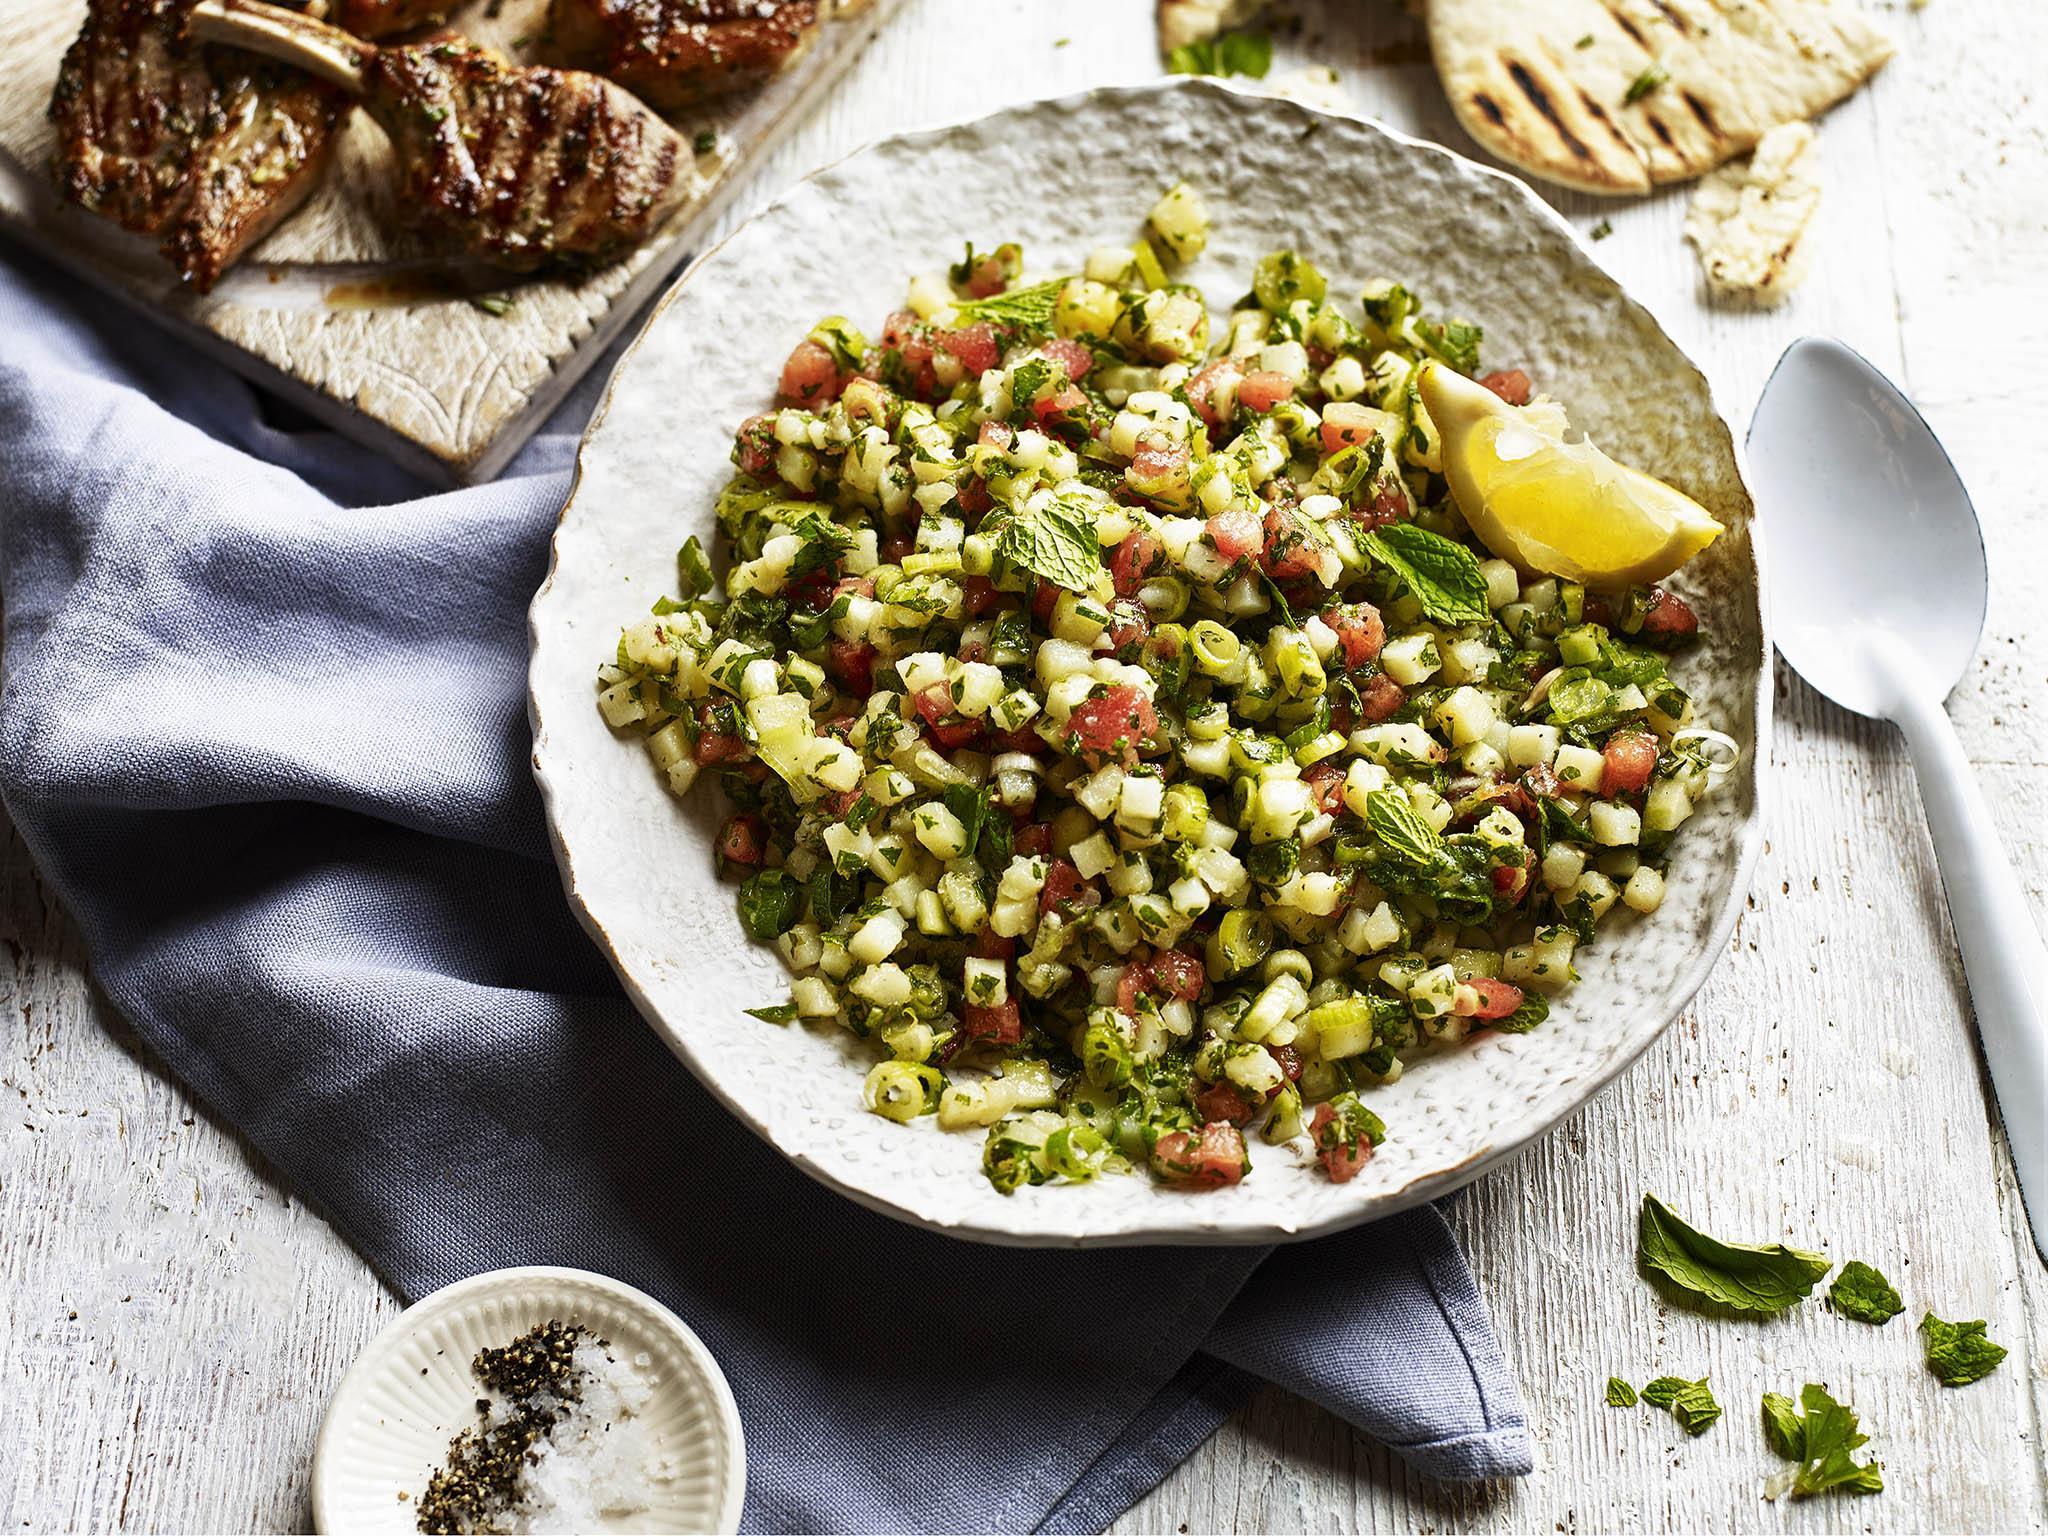 How to make tabbouleh in 20 minutes | The Independent | The Independent